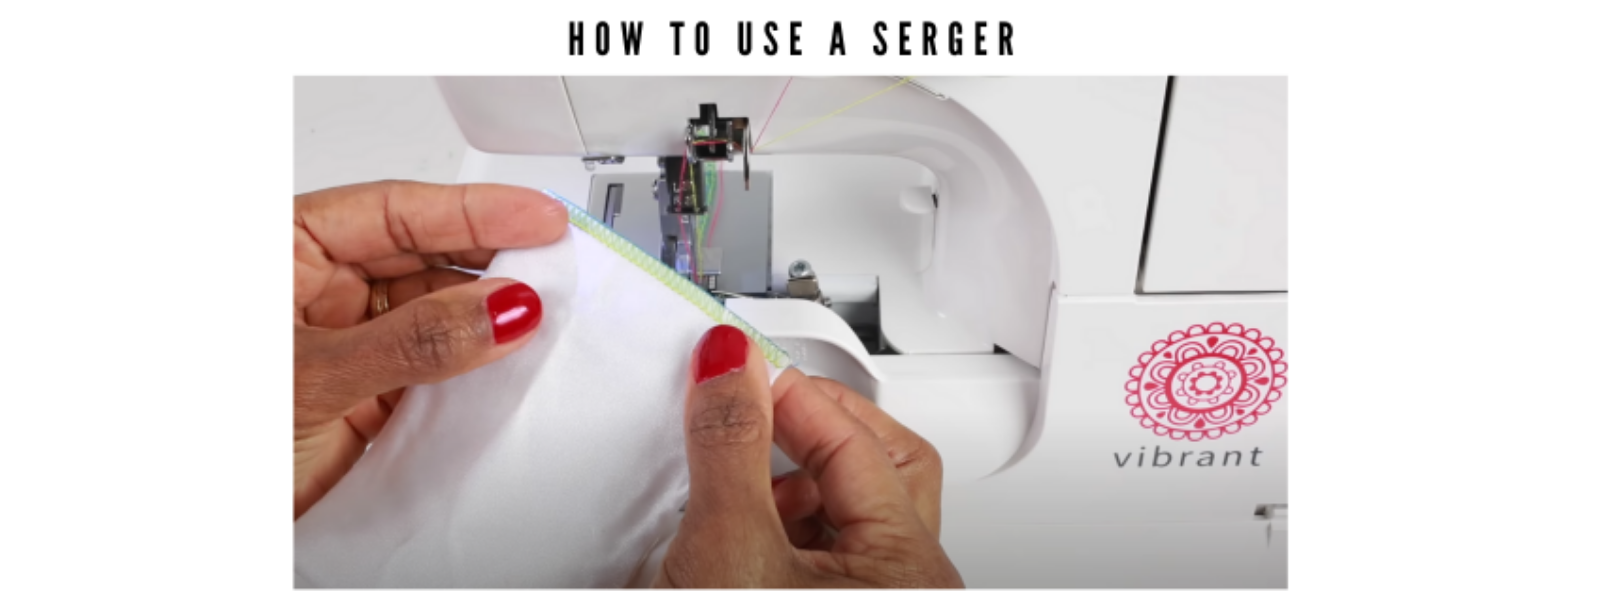 Anita_By_Design_How_To_Use_A_Serger.png